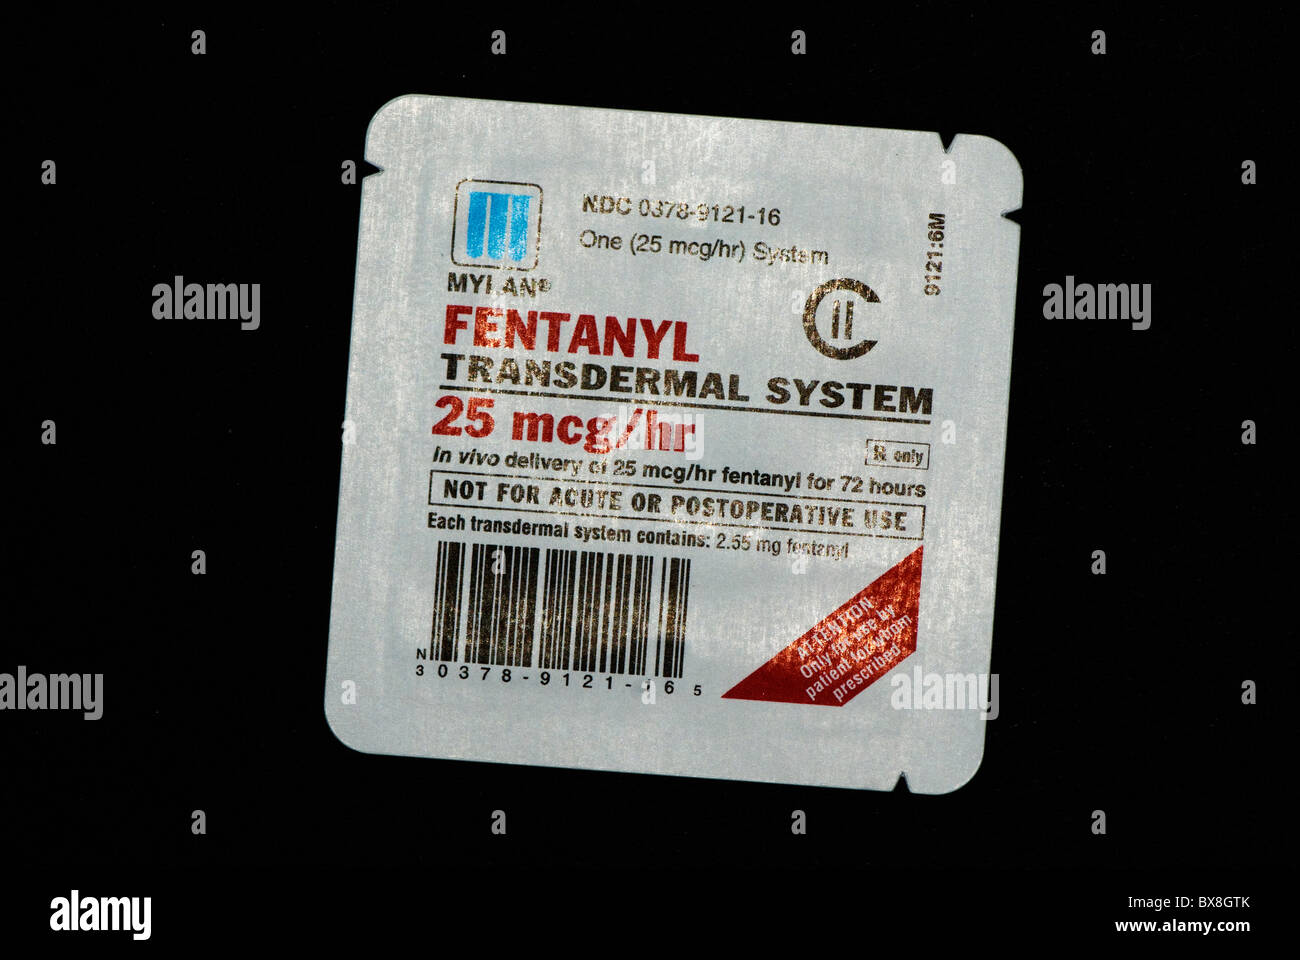 fentanyl narcotic patches for pain control Stock Photo